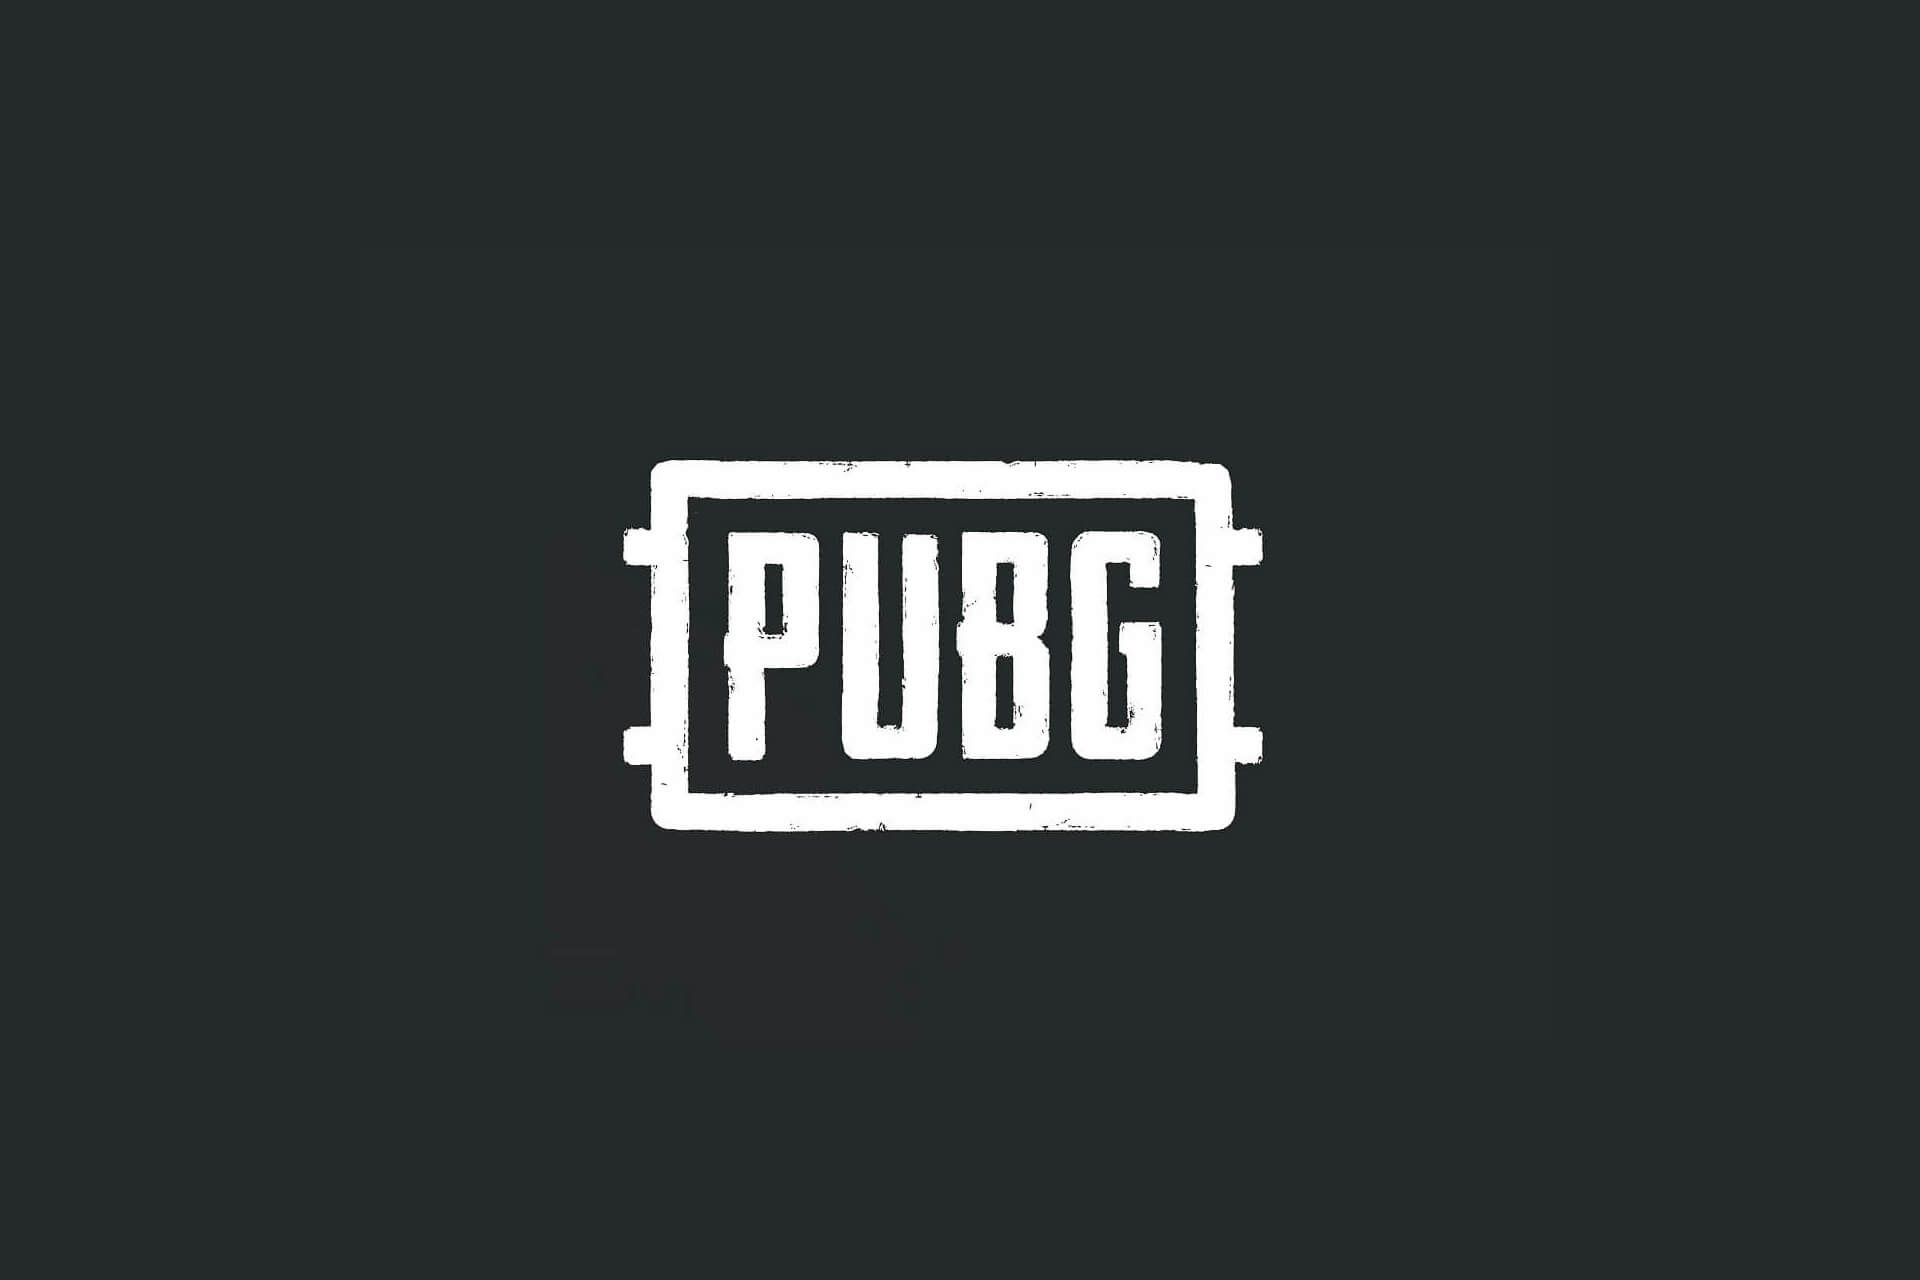 PUBG Lite is not available in your region